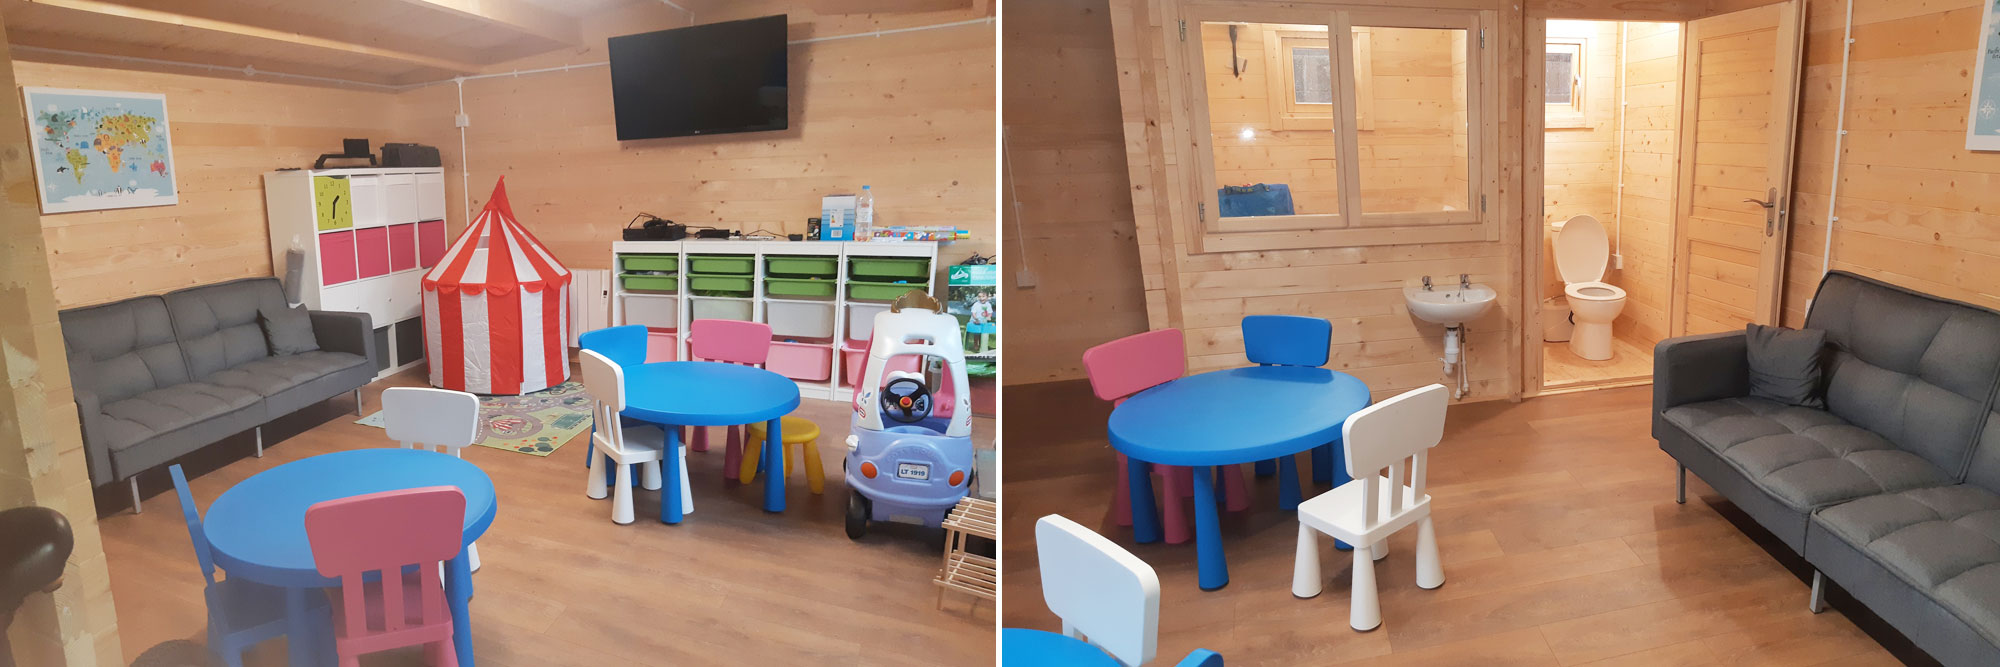 Image of inside of children's playhouse cabin